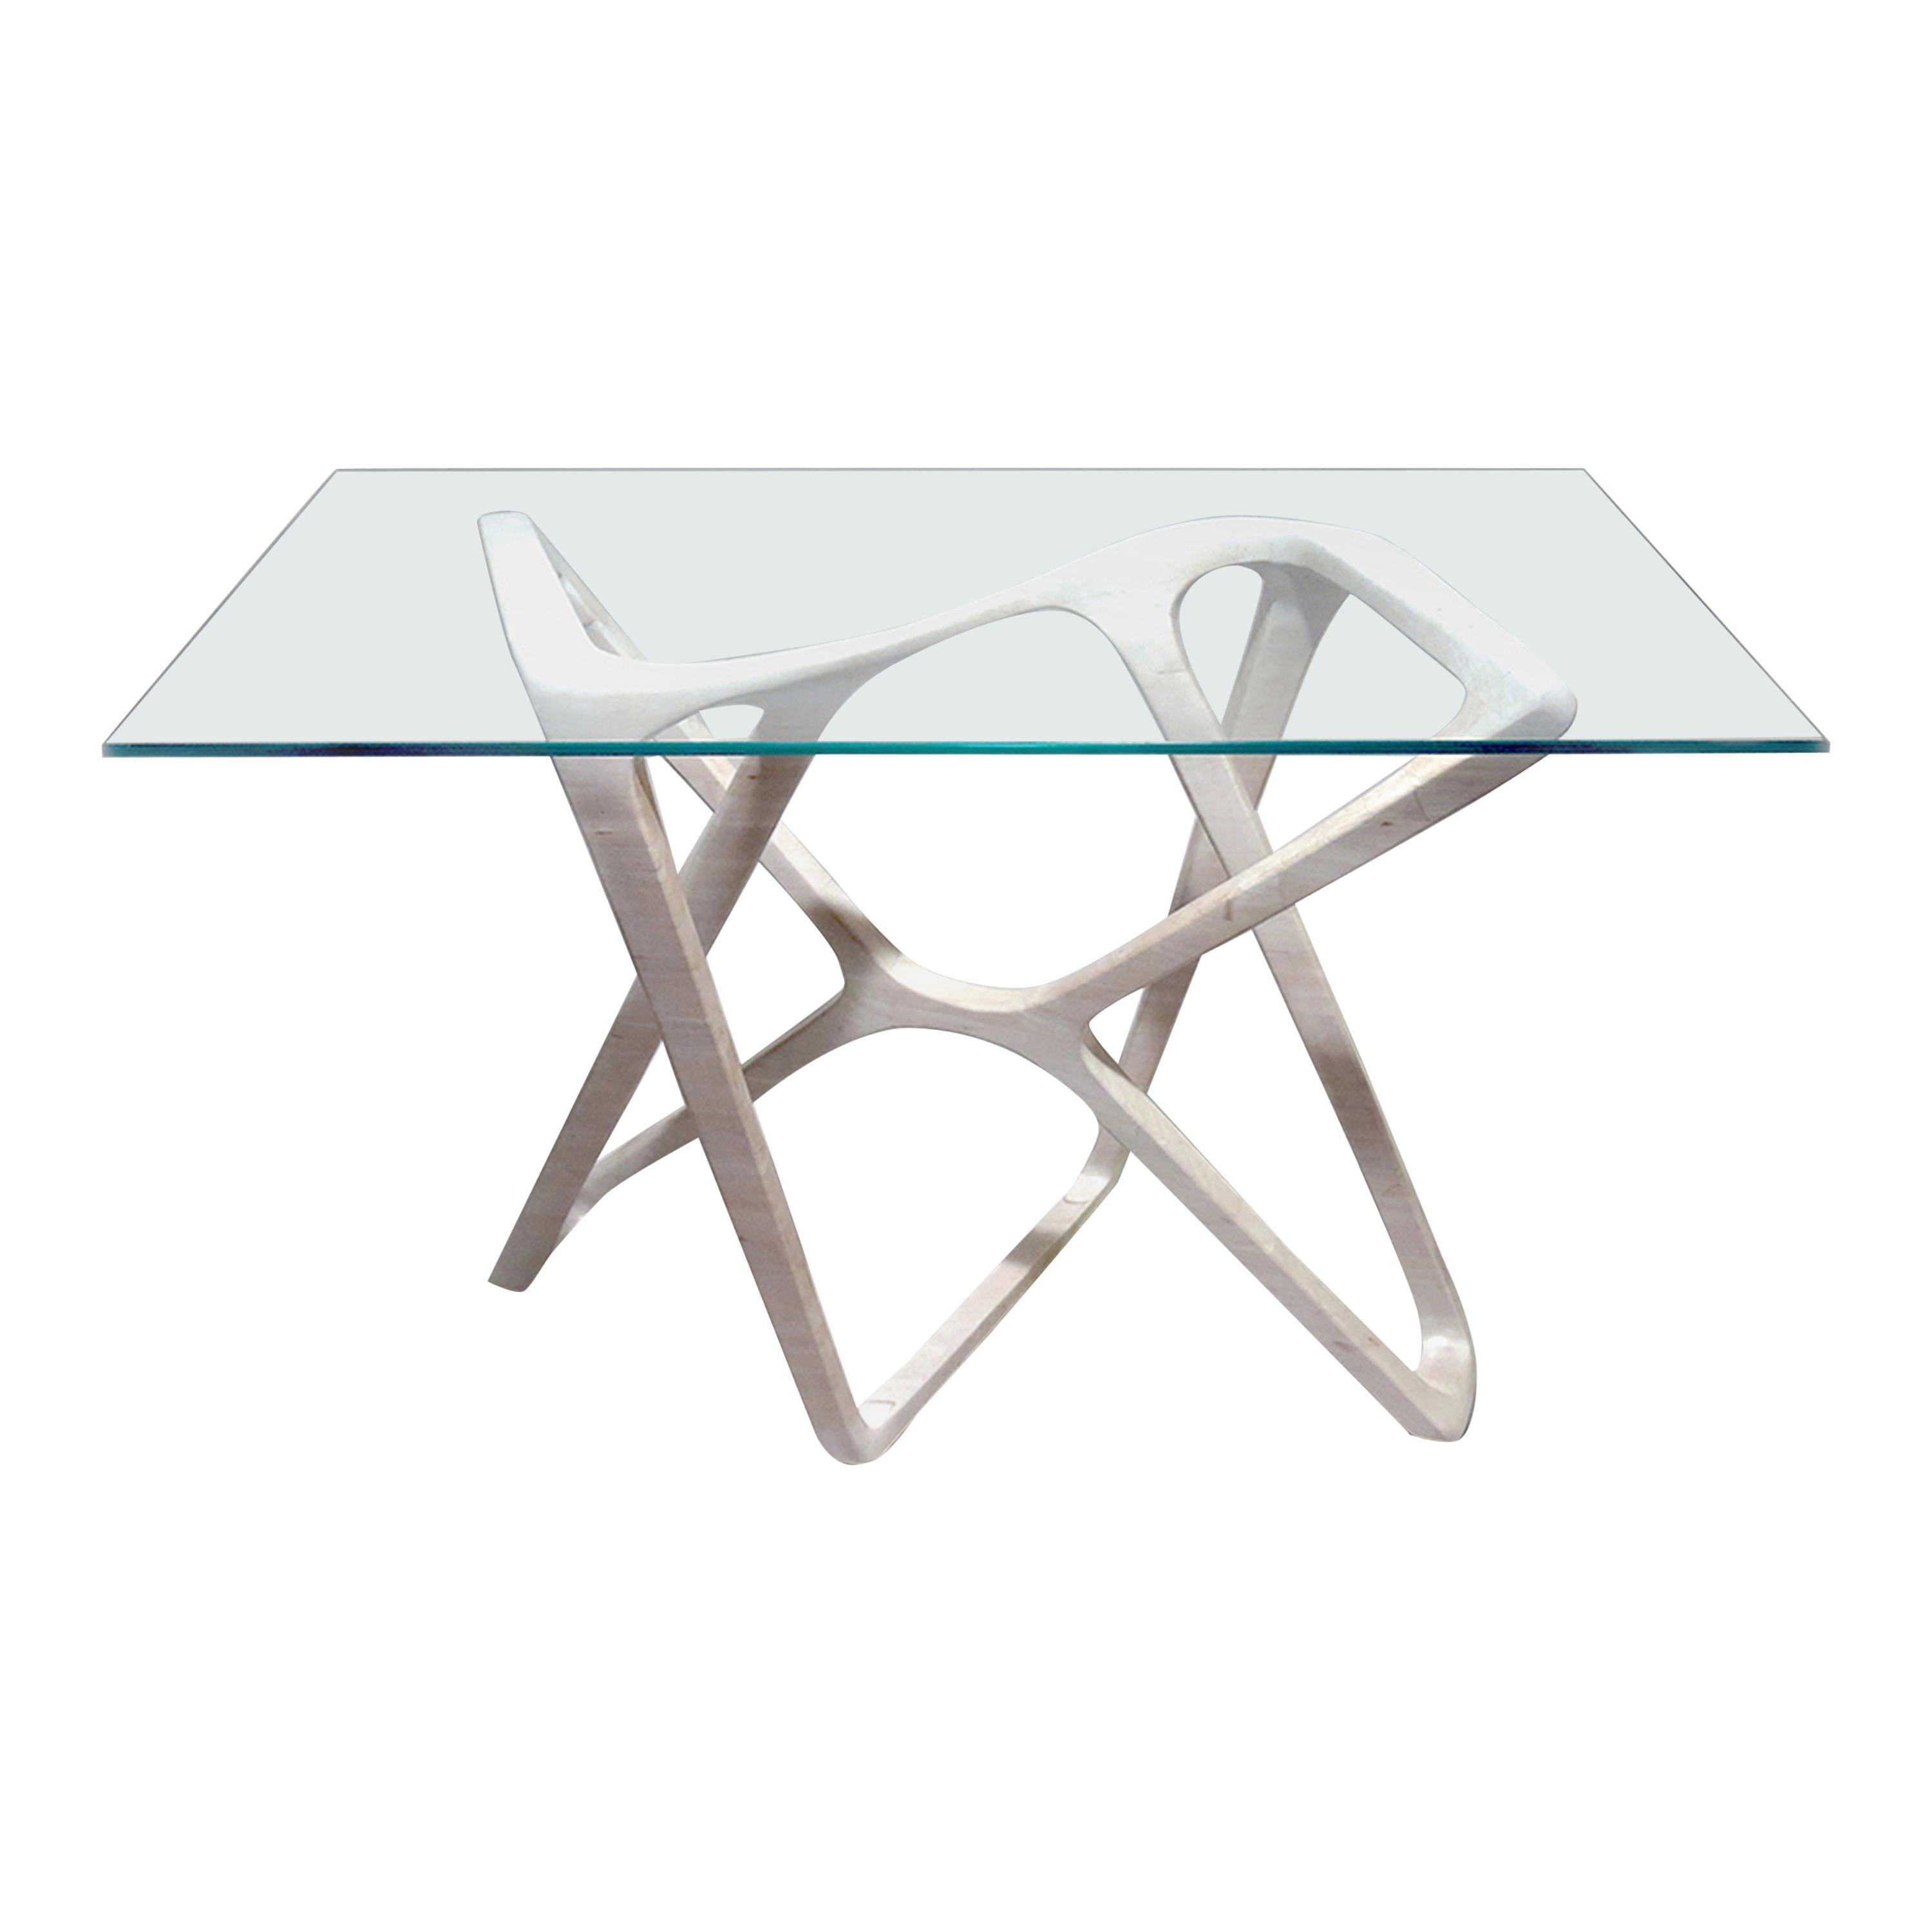 N2 Desk, Handcrafted in Solid Wood with Clear Glass Top